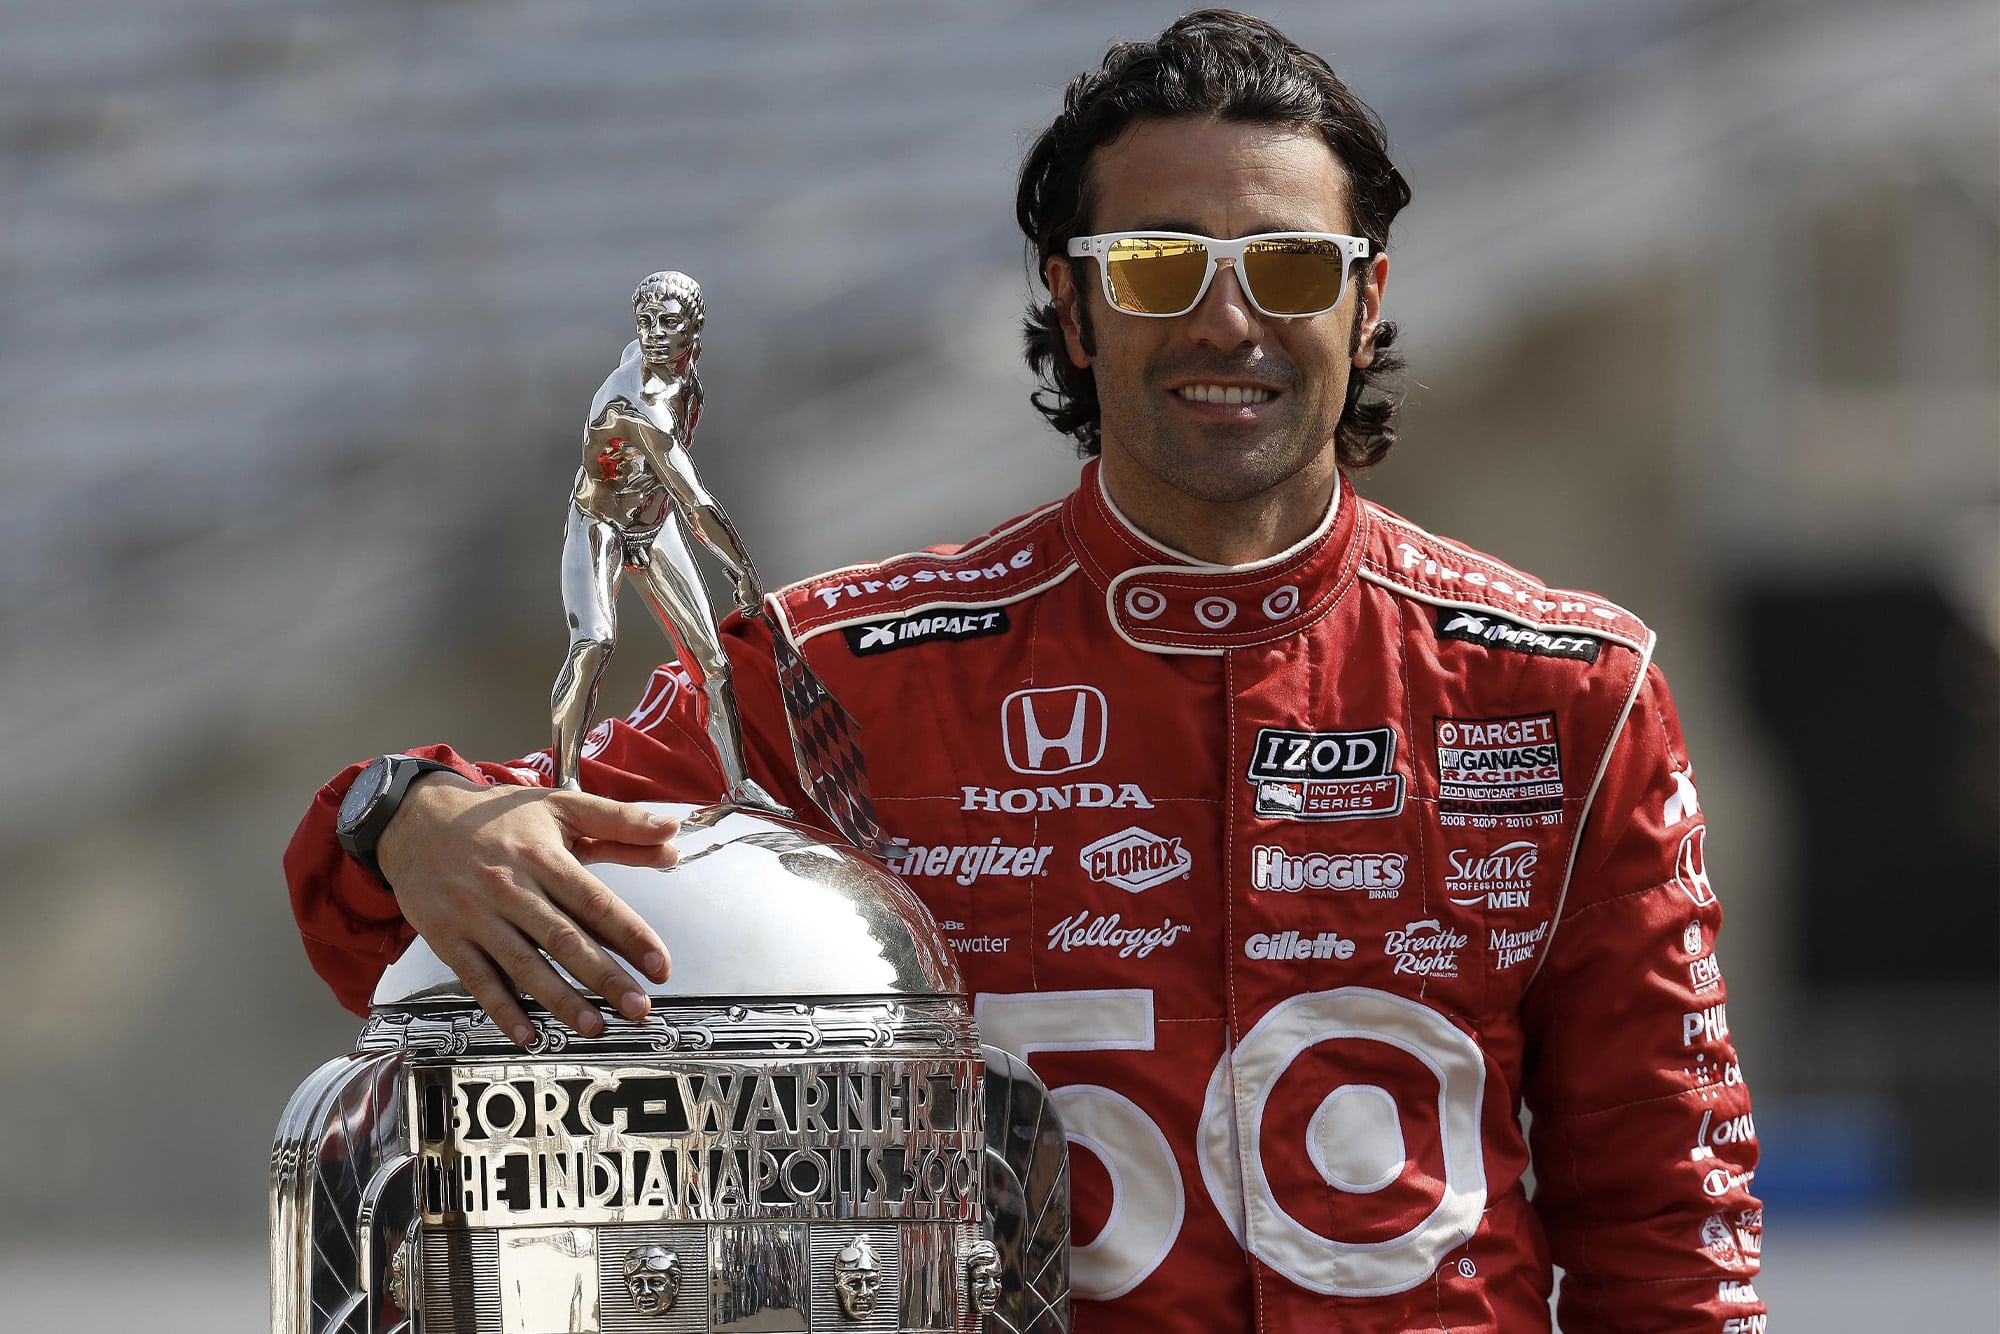 Dario Franchitti with the Borg Warner Trophy after winning the 2012 Indy 500